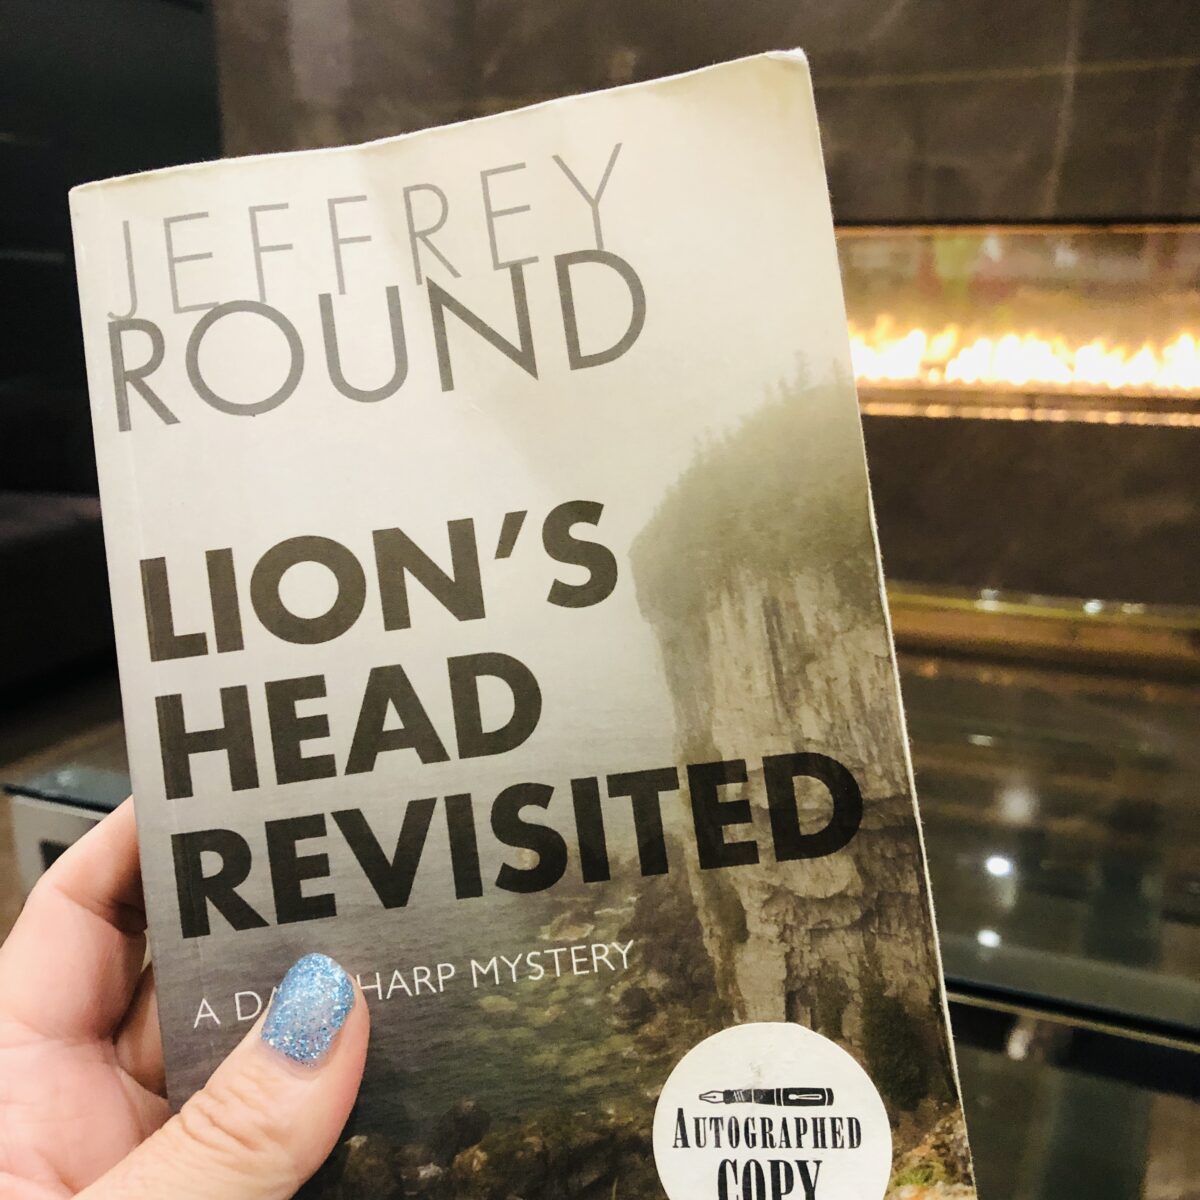 Jeffrey Round, Lion's Head Revisited book cover